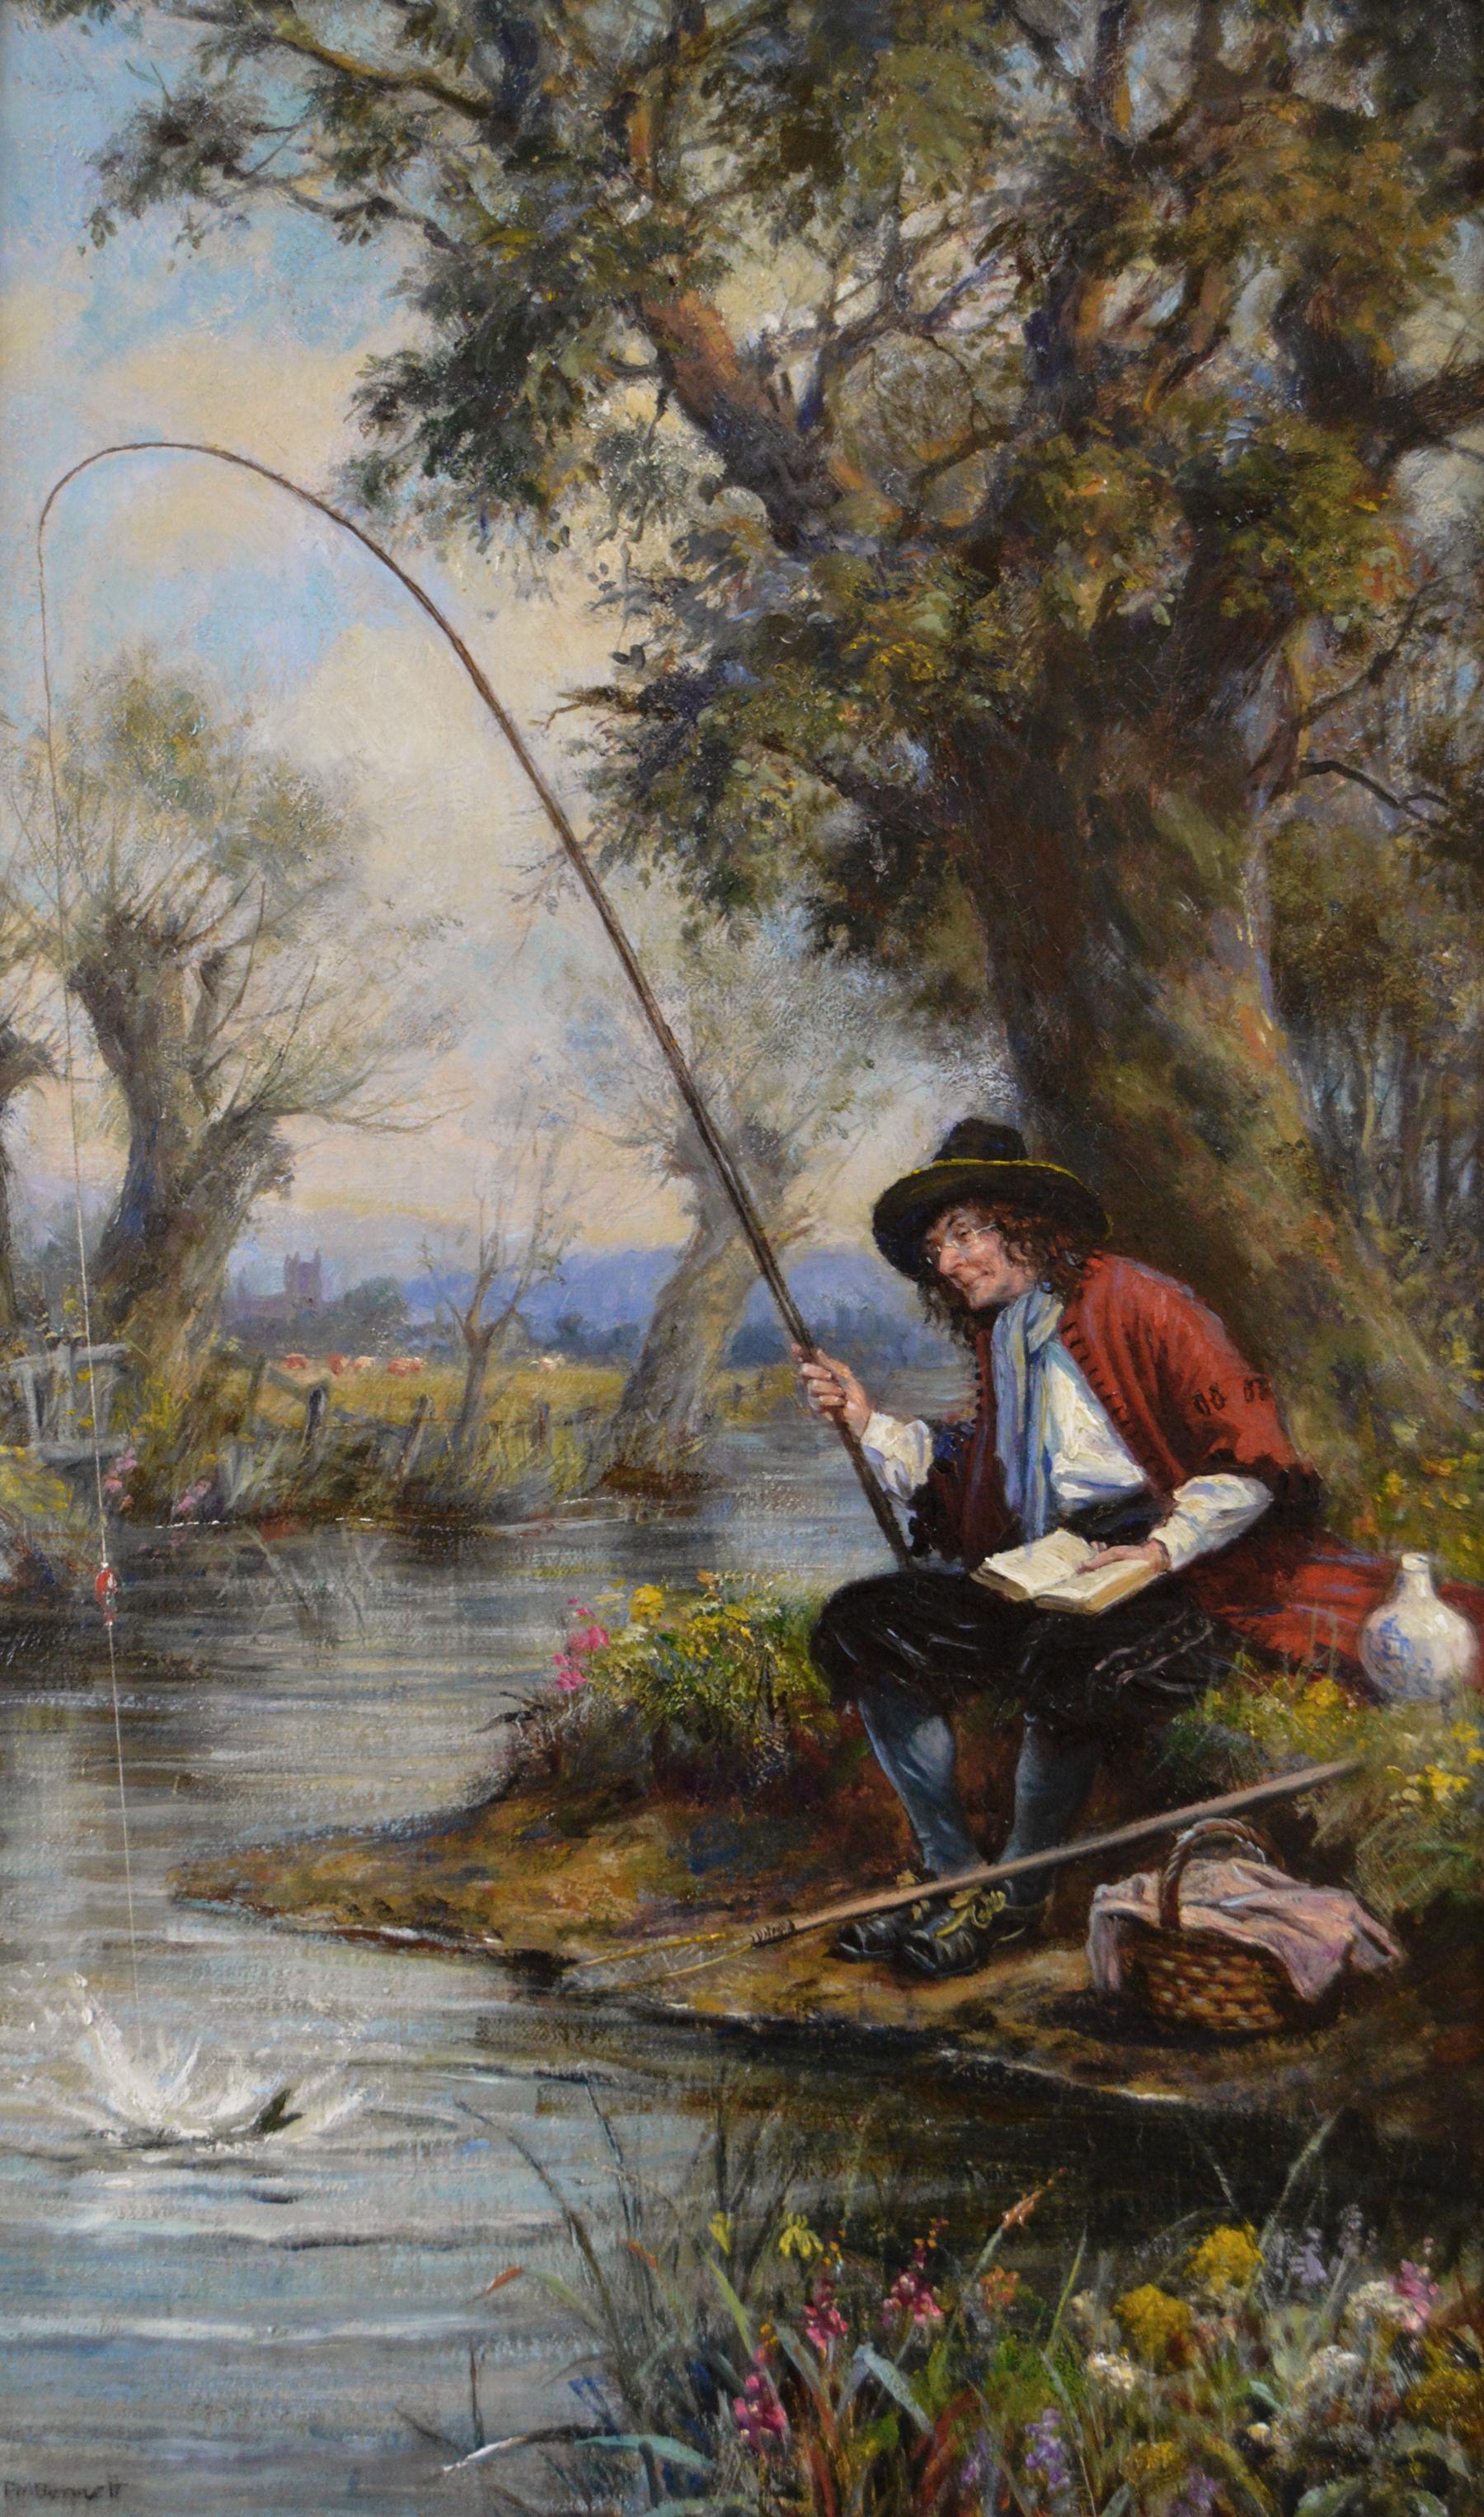 Genre landscape oil painting of an angler by a river - Painting by Frank Moss Bennett